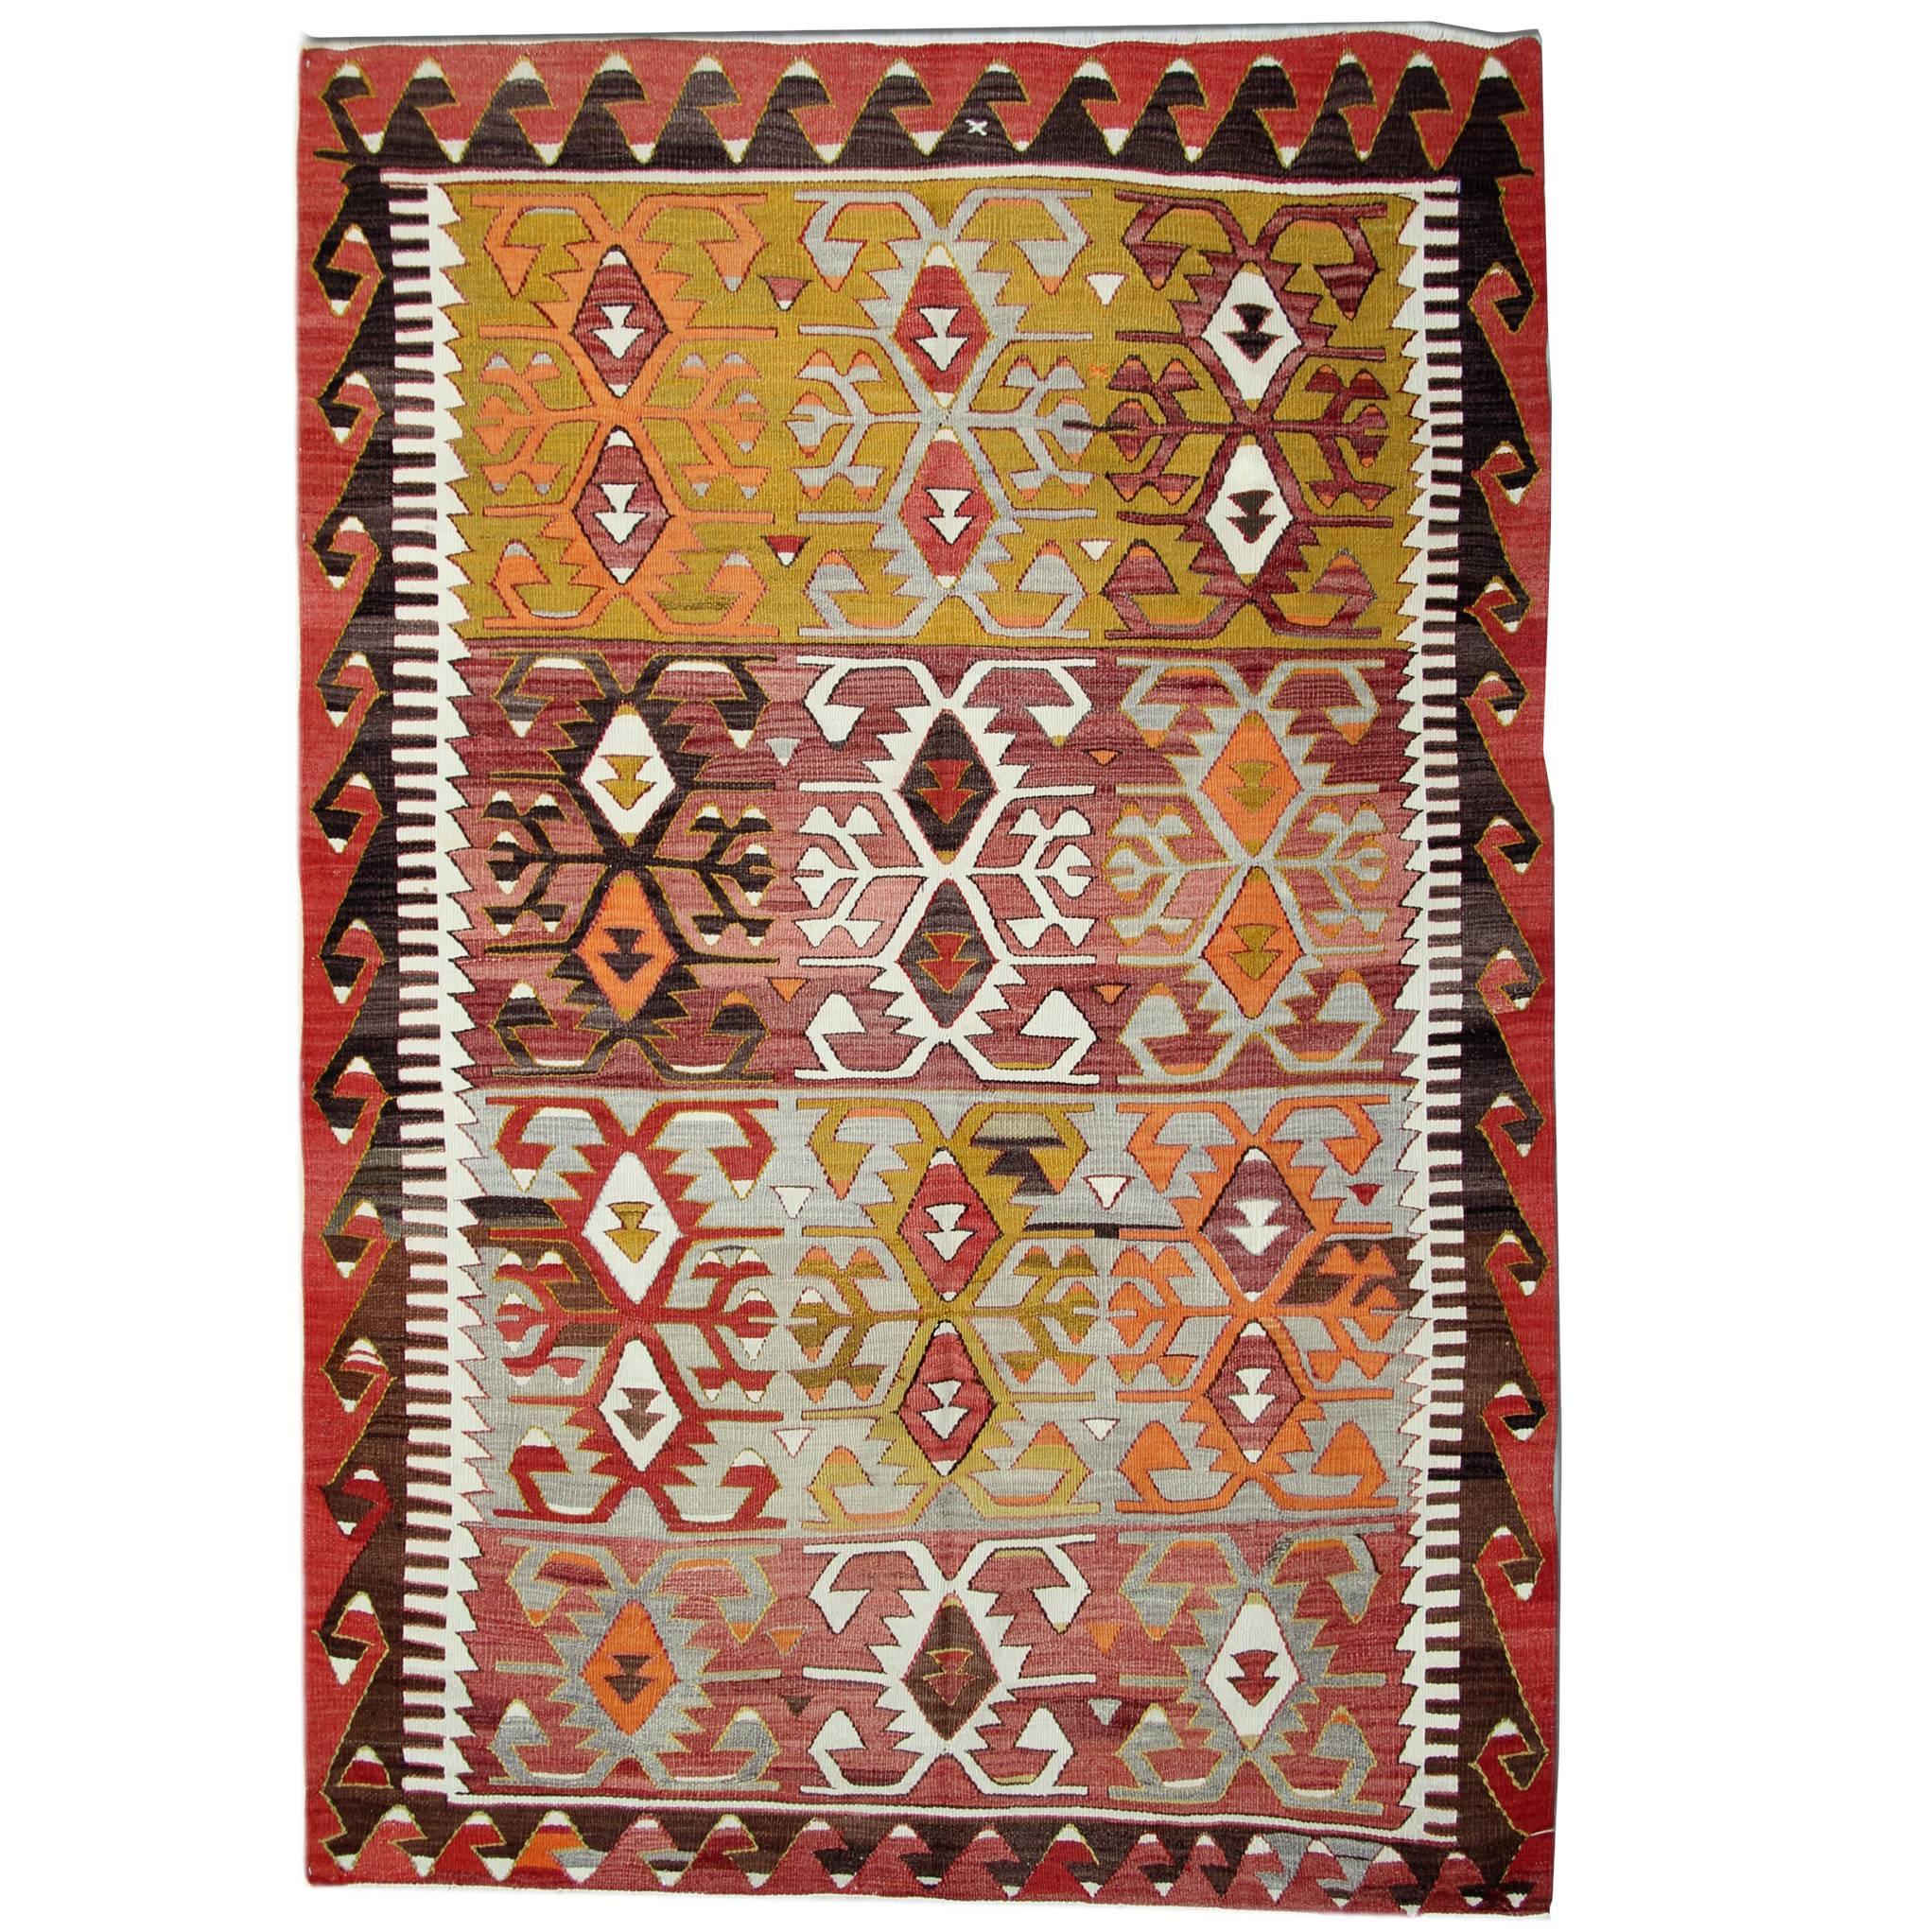 Antique Kilim Rugs, Traditional Oriental Rugs, Turkish Handmade Carpet for Sale For Sale